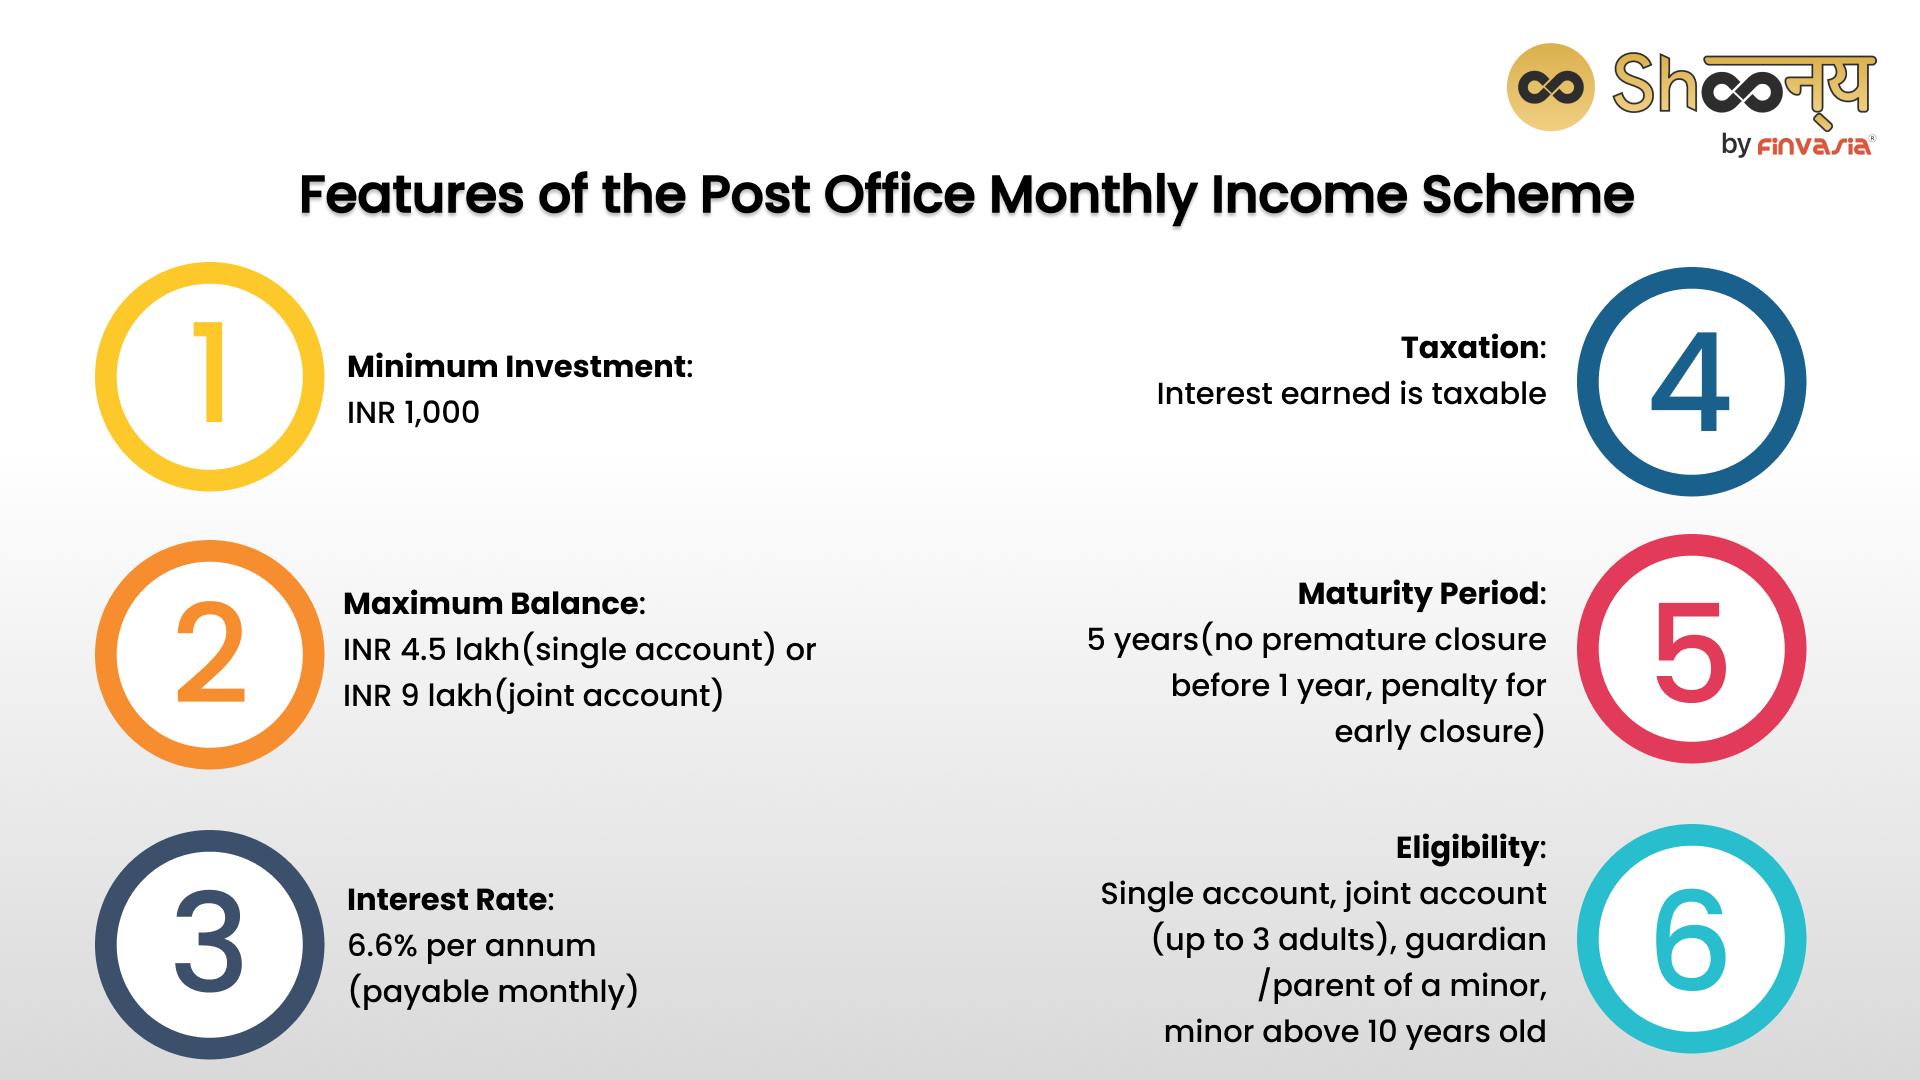 features of the Post Office Monthly Income Scheme